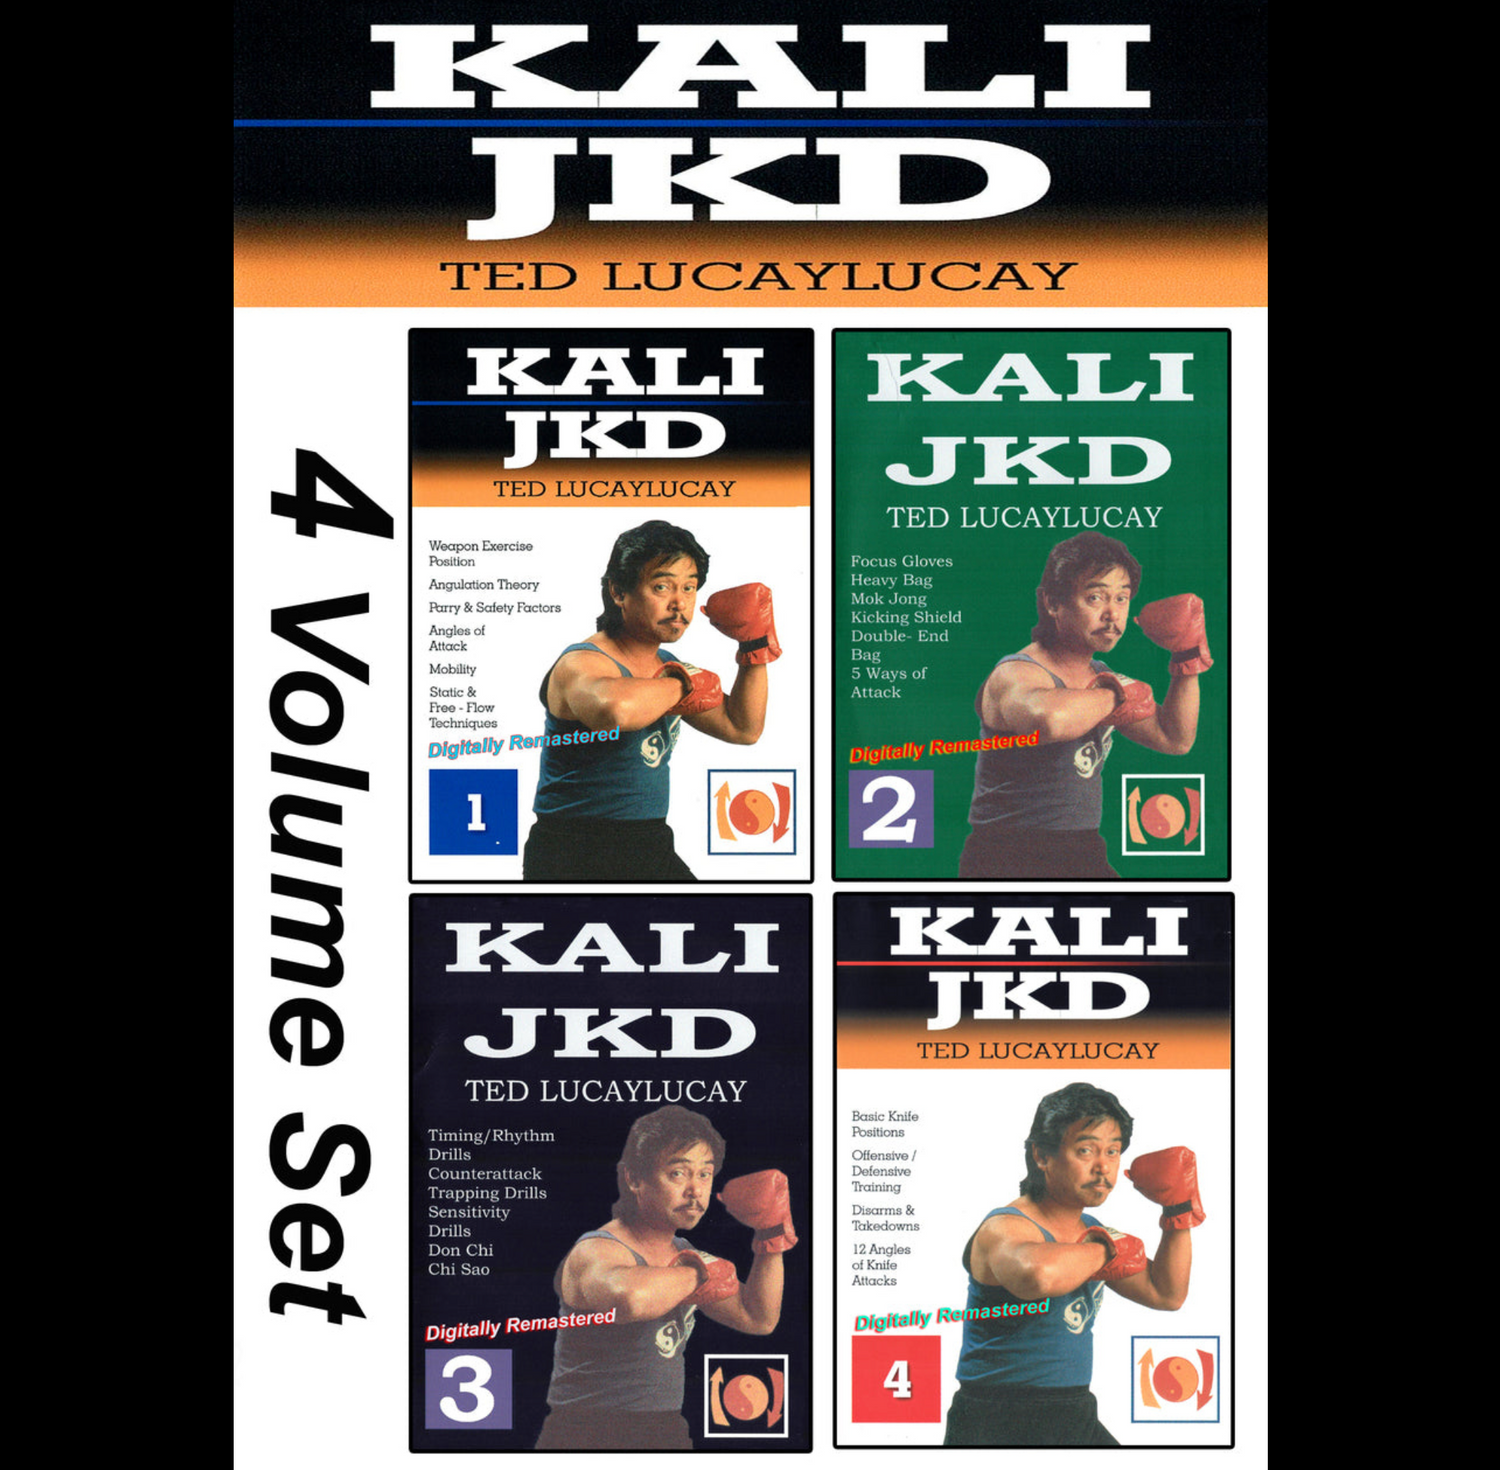 Kali JKD 4 Vol Course by Ted Lucaylucay (On Demand)